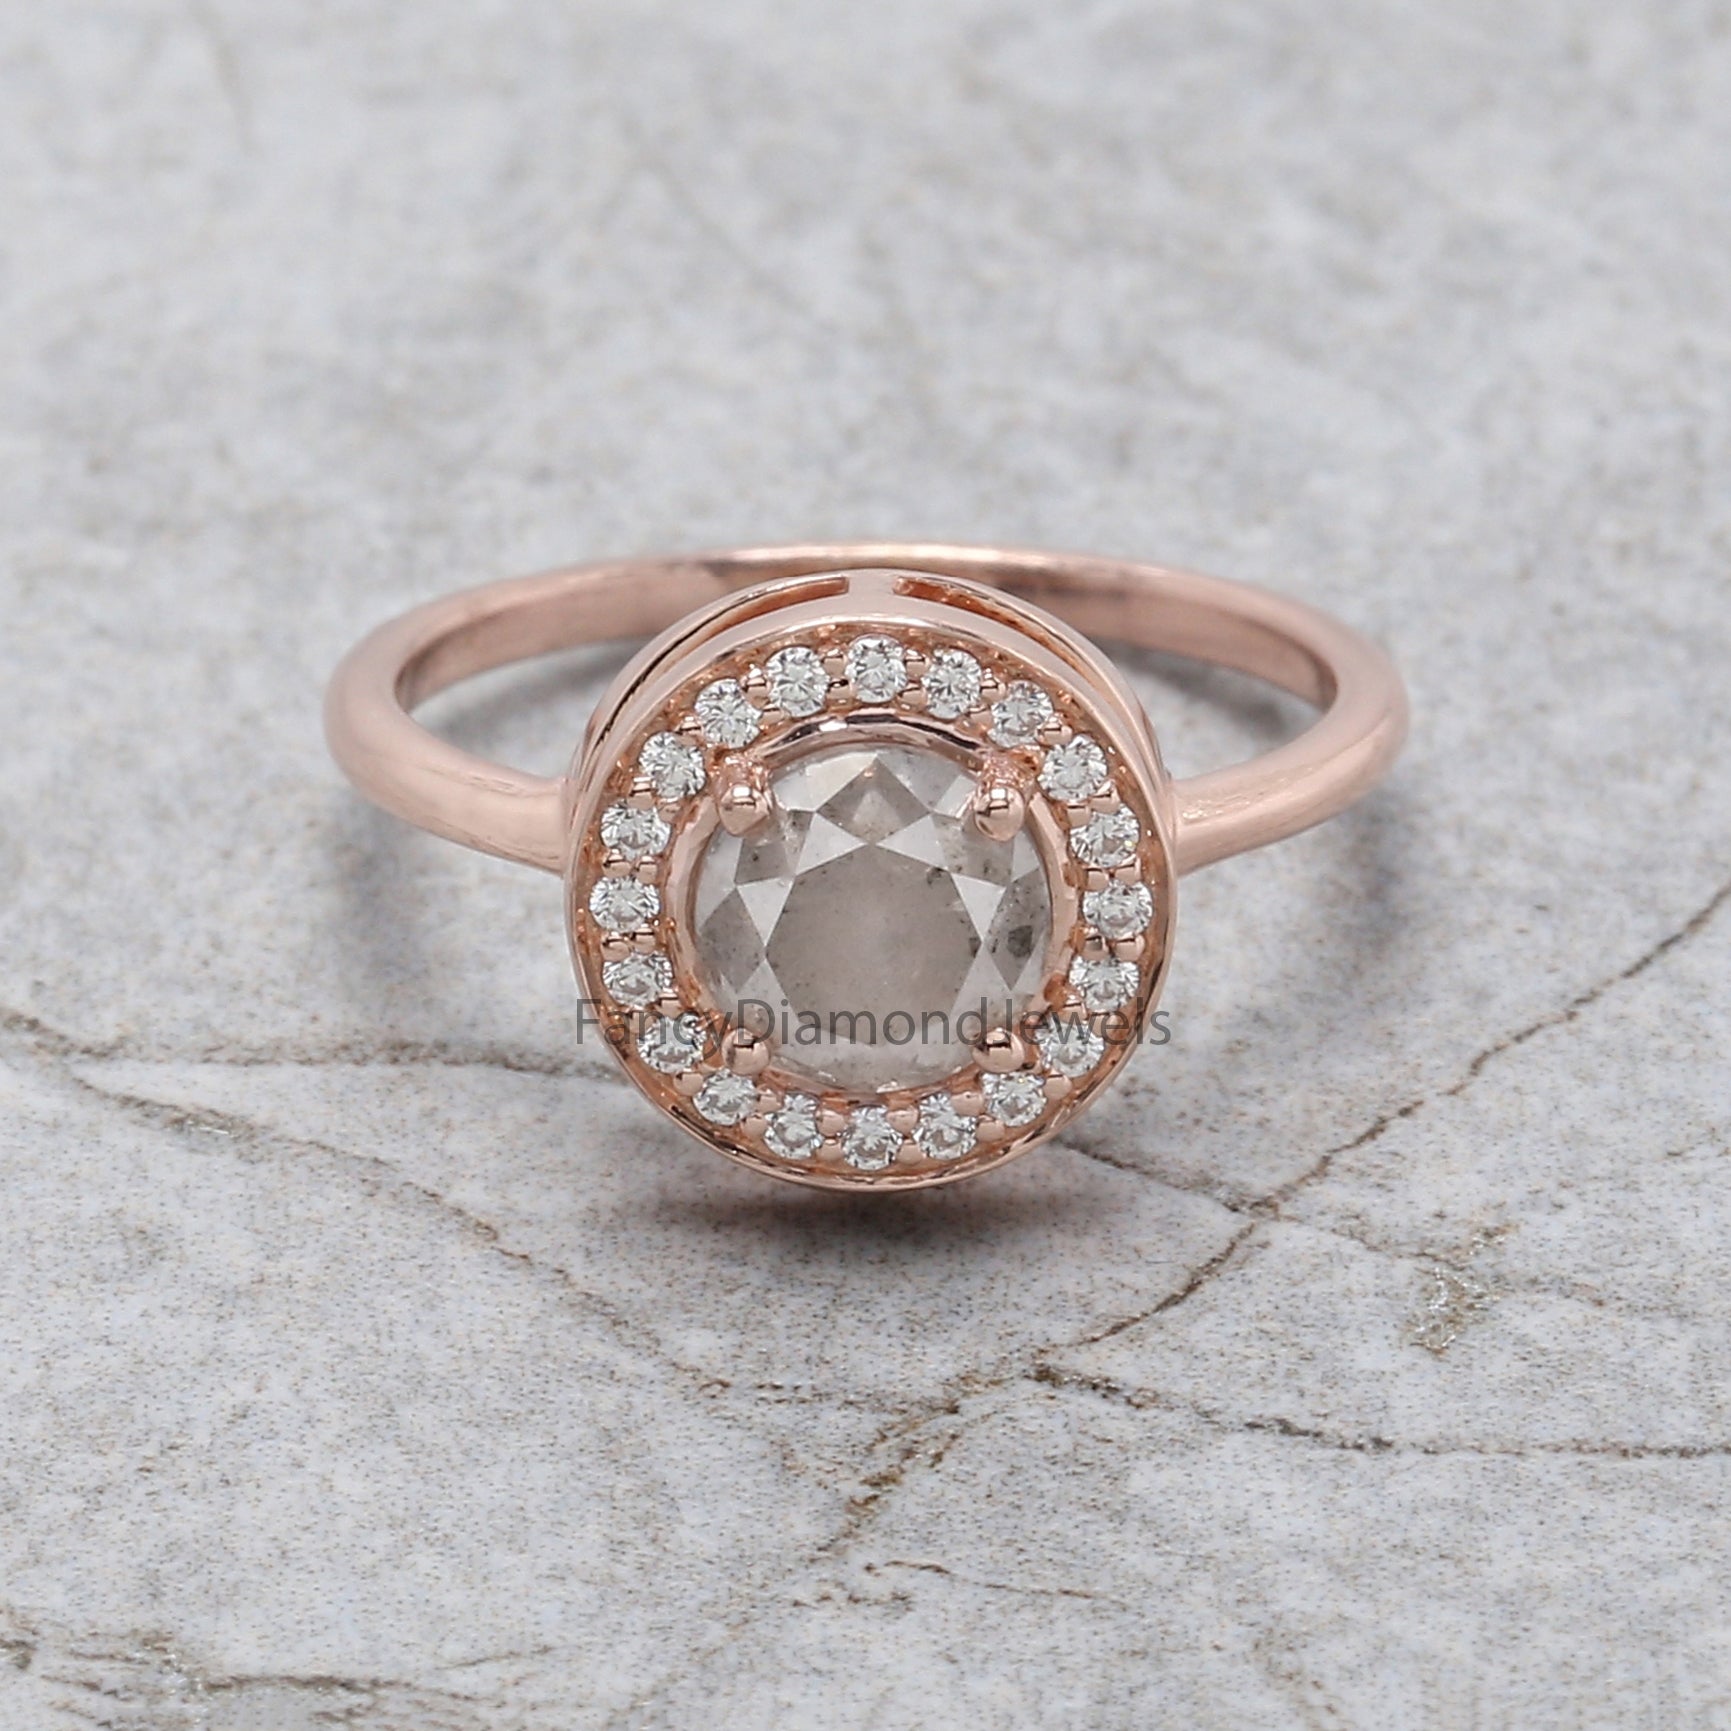 Round Cut Salt And Pepper Diamond Ring 1.25 Ct 6.15 MM Round Diamond Ring 14K Solid Rose Gold Silver Engagement Ring Gift For Her QN486